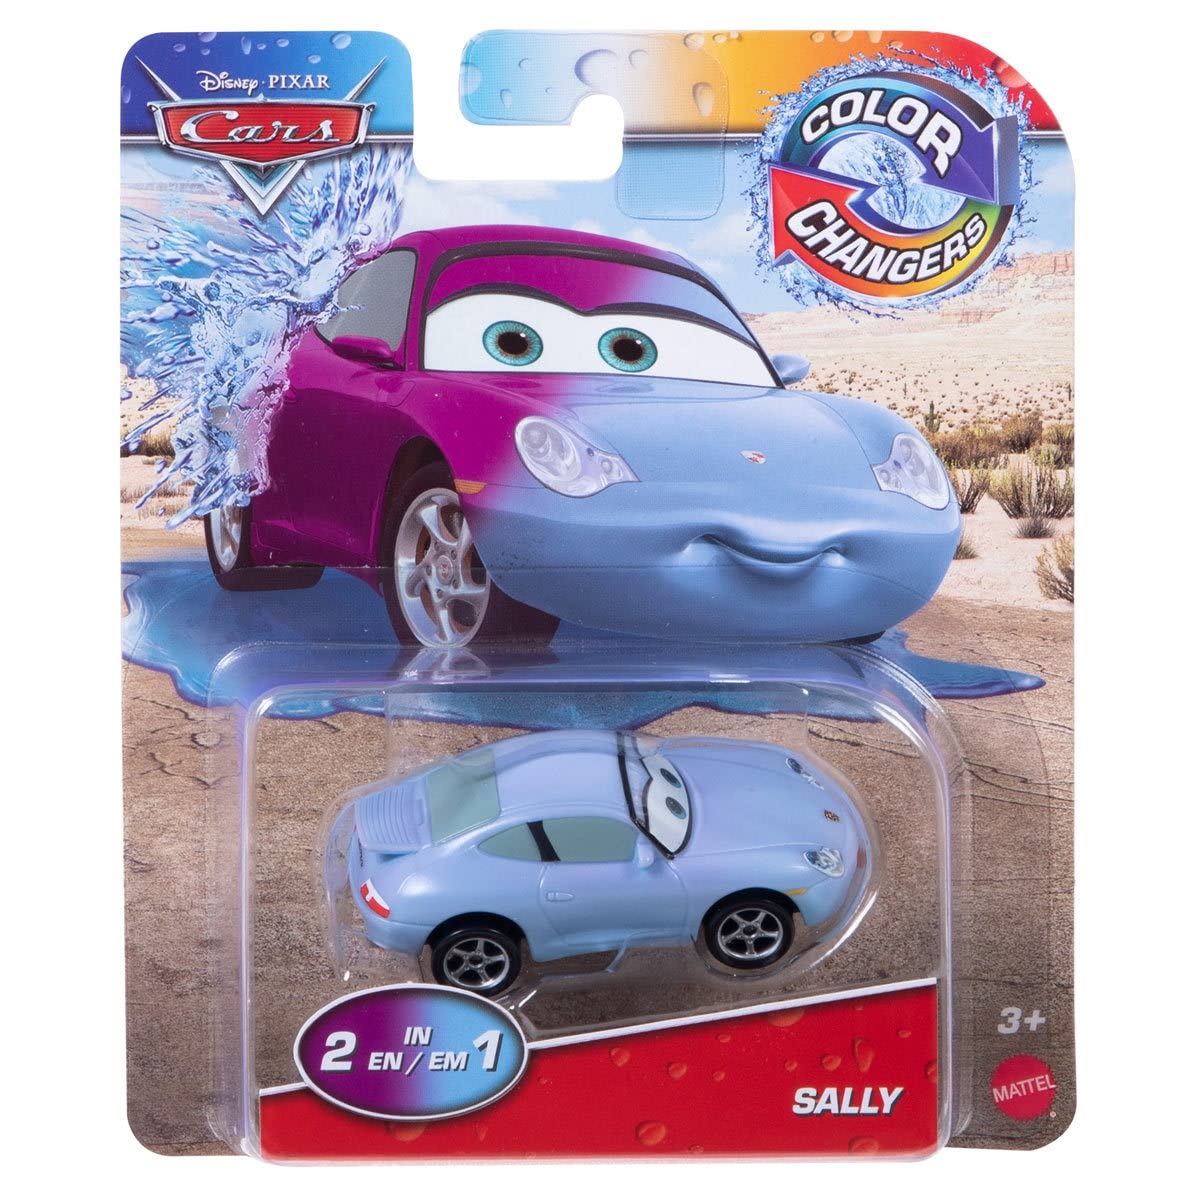 Disney Pixar Cars Color Changers Sally Scale 1:55